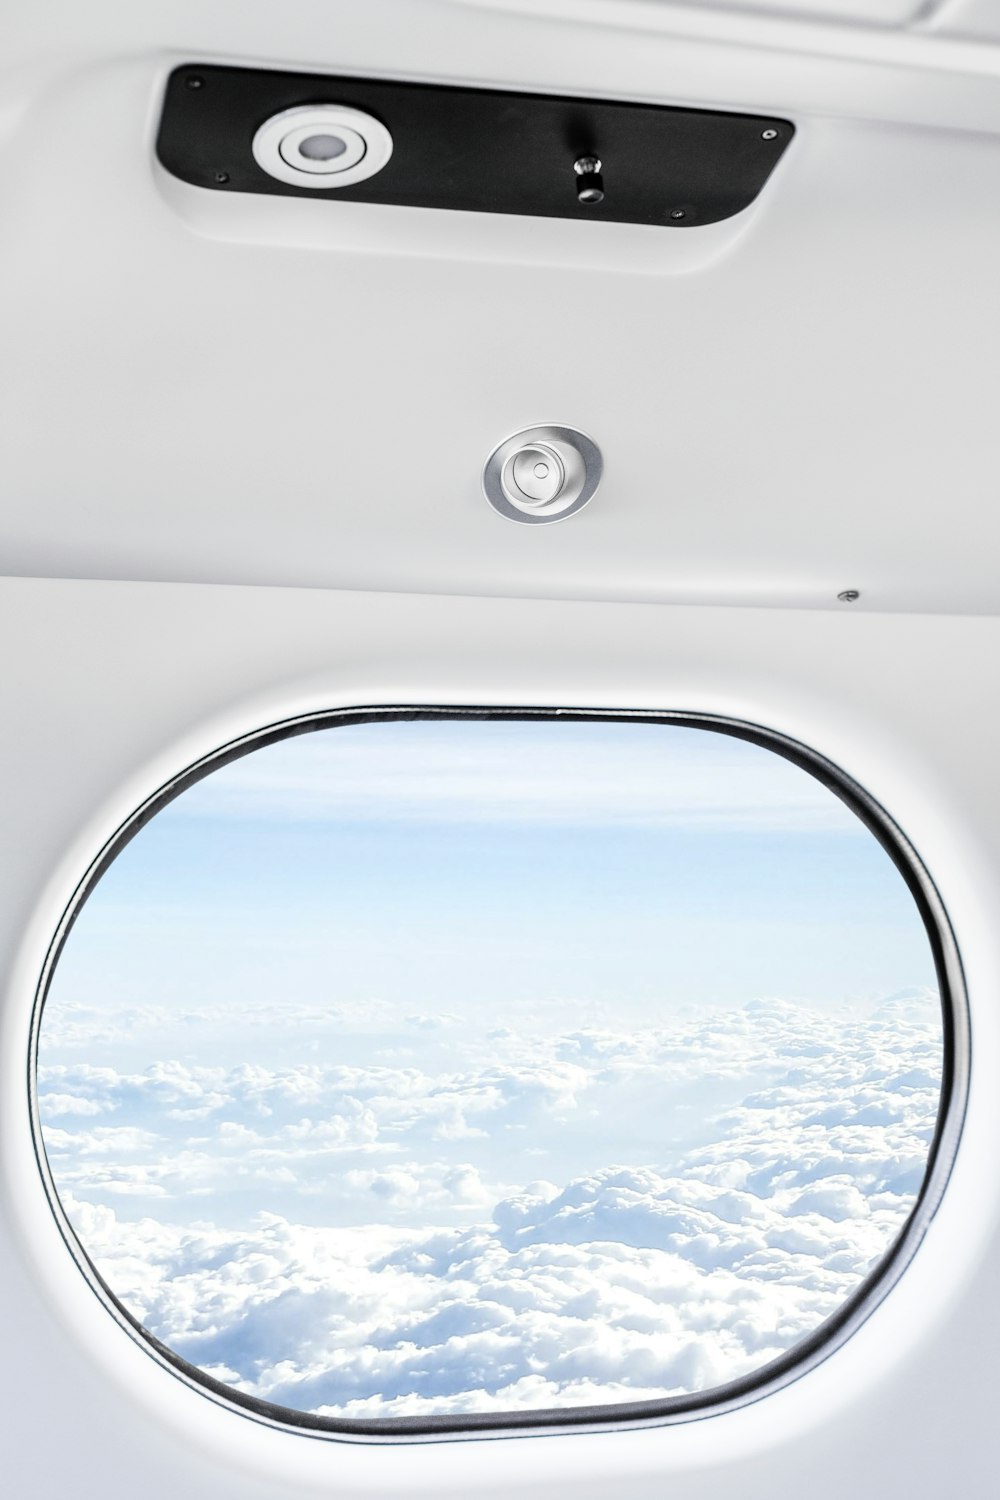 an airplane window with a view of the clouds